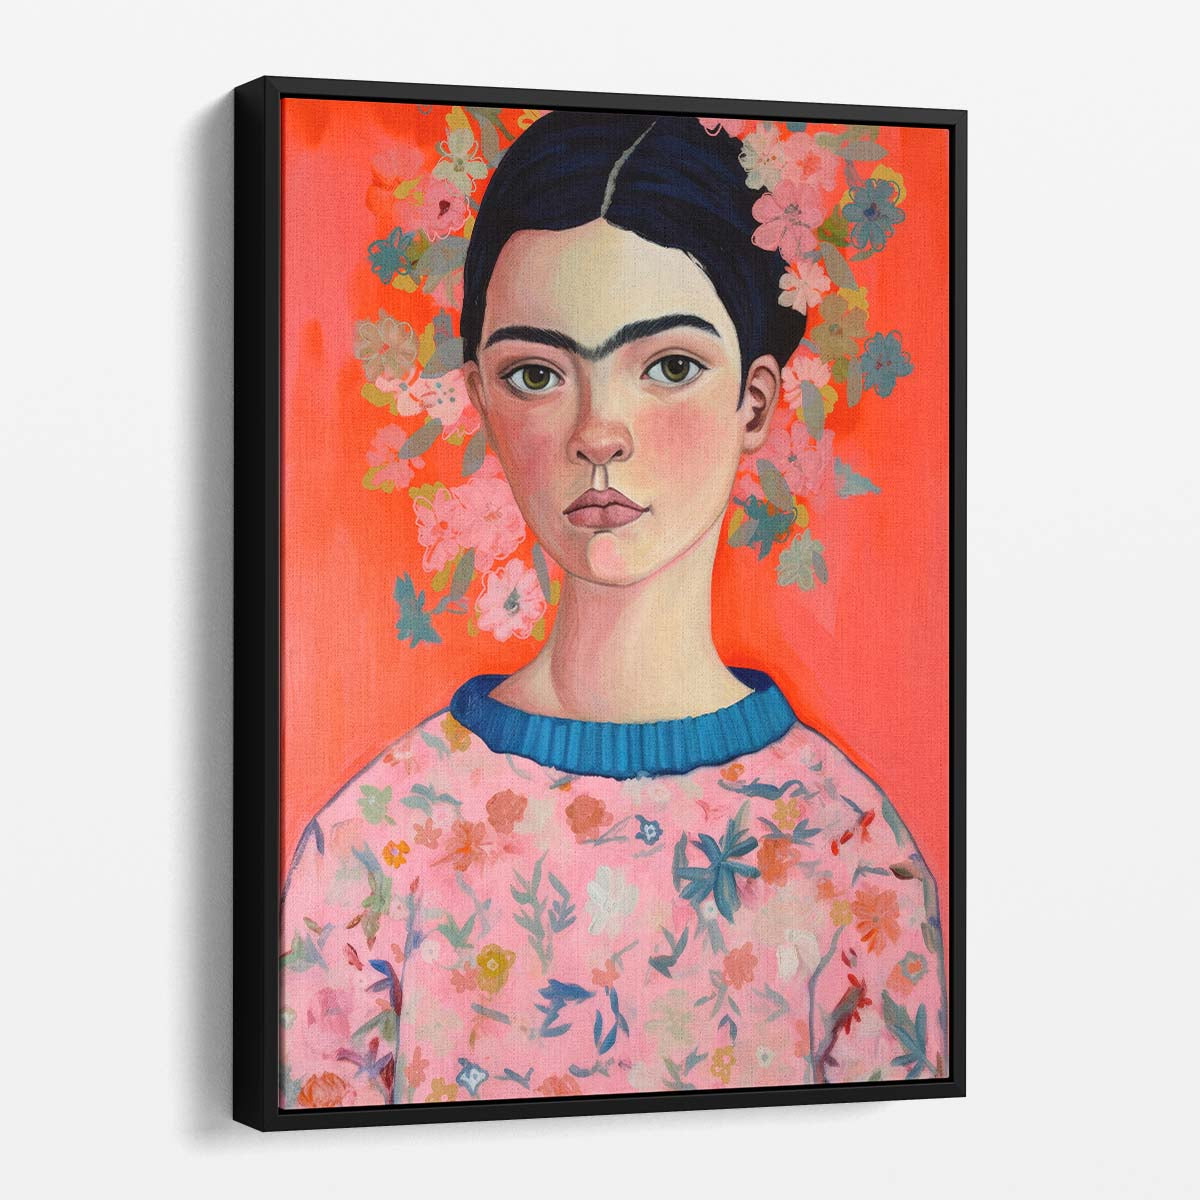 Colorful Young Frida Kahlo Illustration with Big Eyes & Flowers by Luxuriance Designs, made in USA